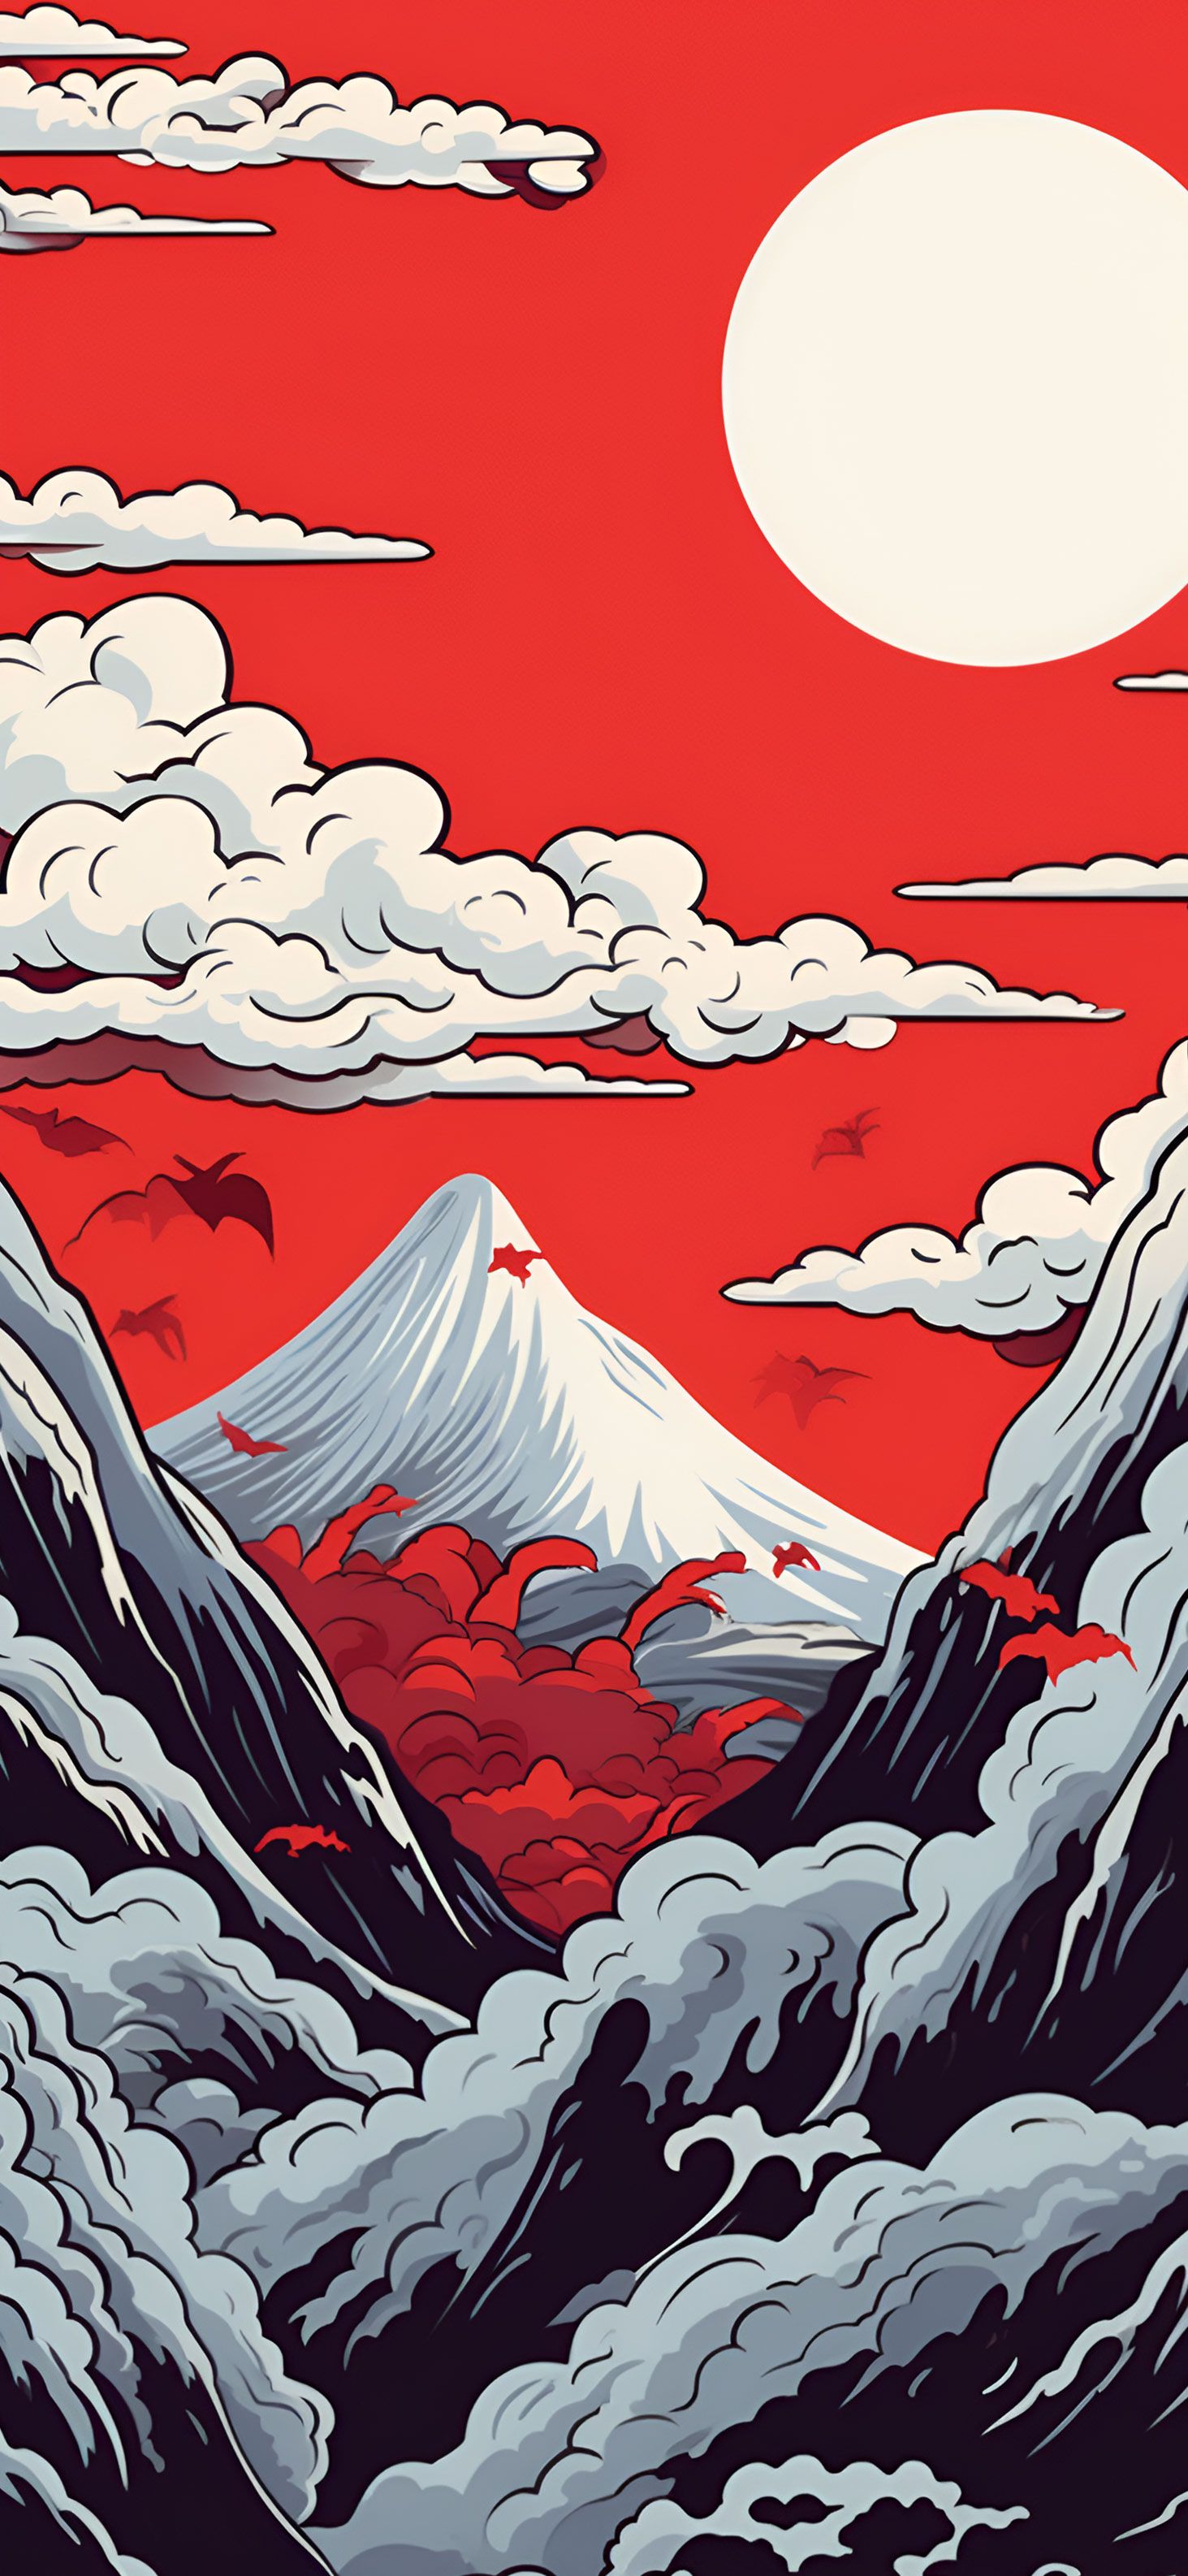 Mountains & Clouds Japanese Aesthetic Wallpaper for iPhone 4k